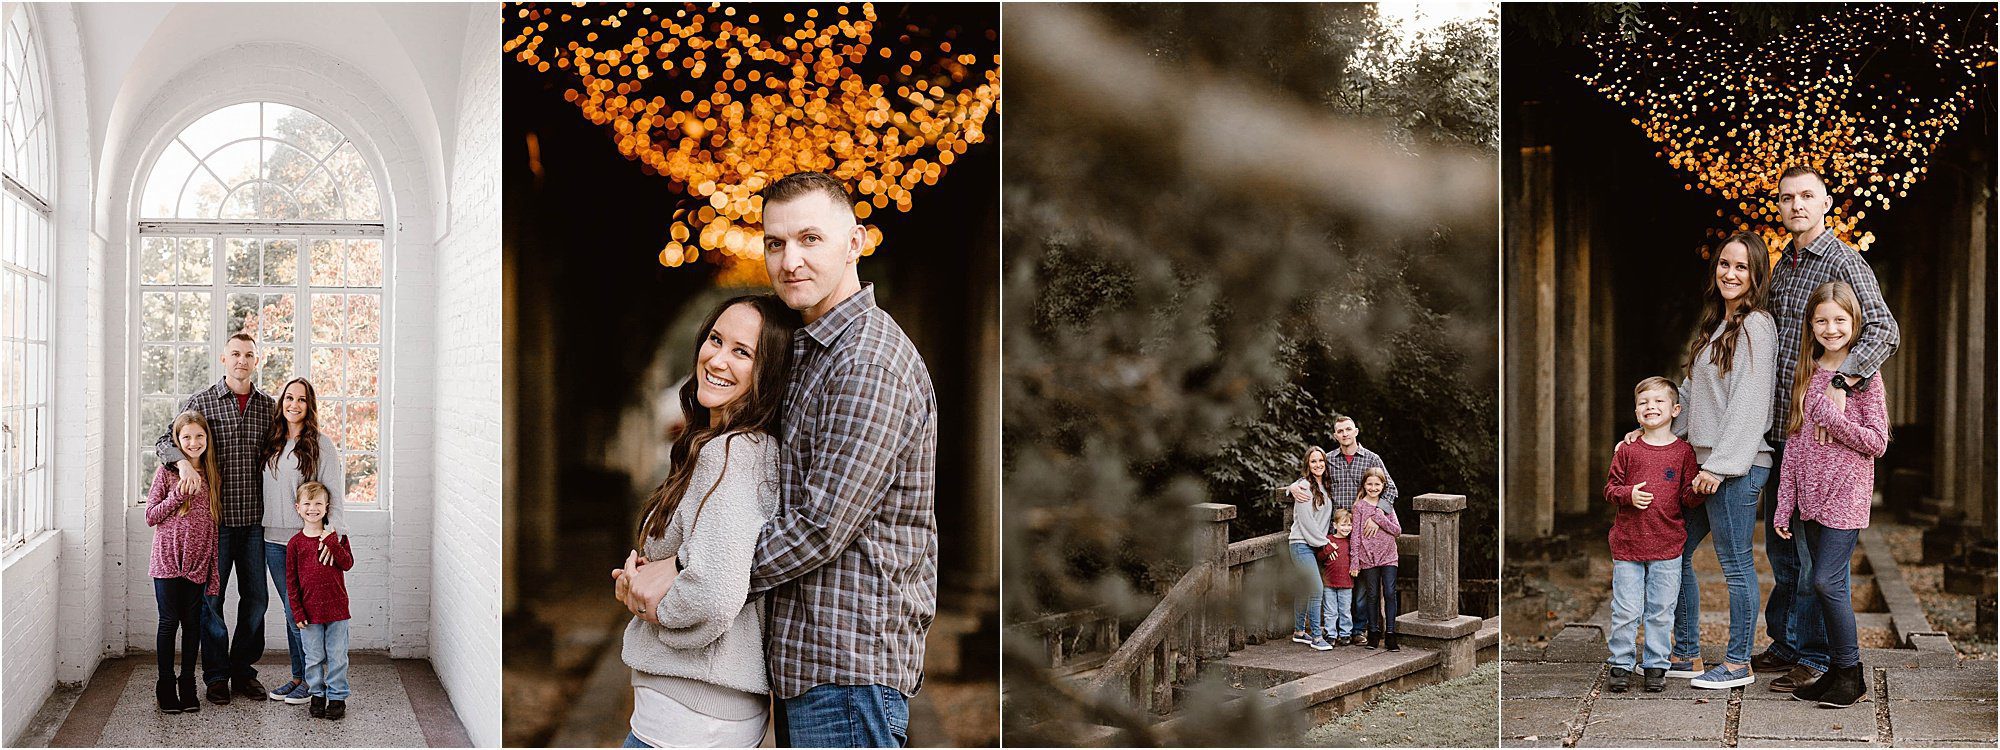 Fall Family Photos at Knoxville Bleak House